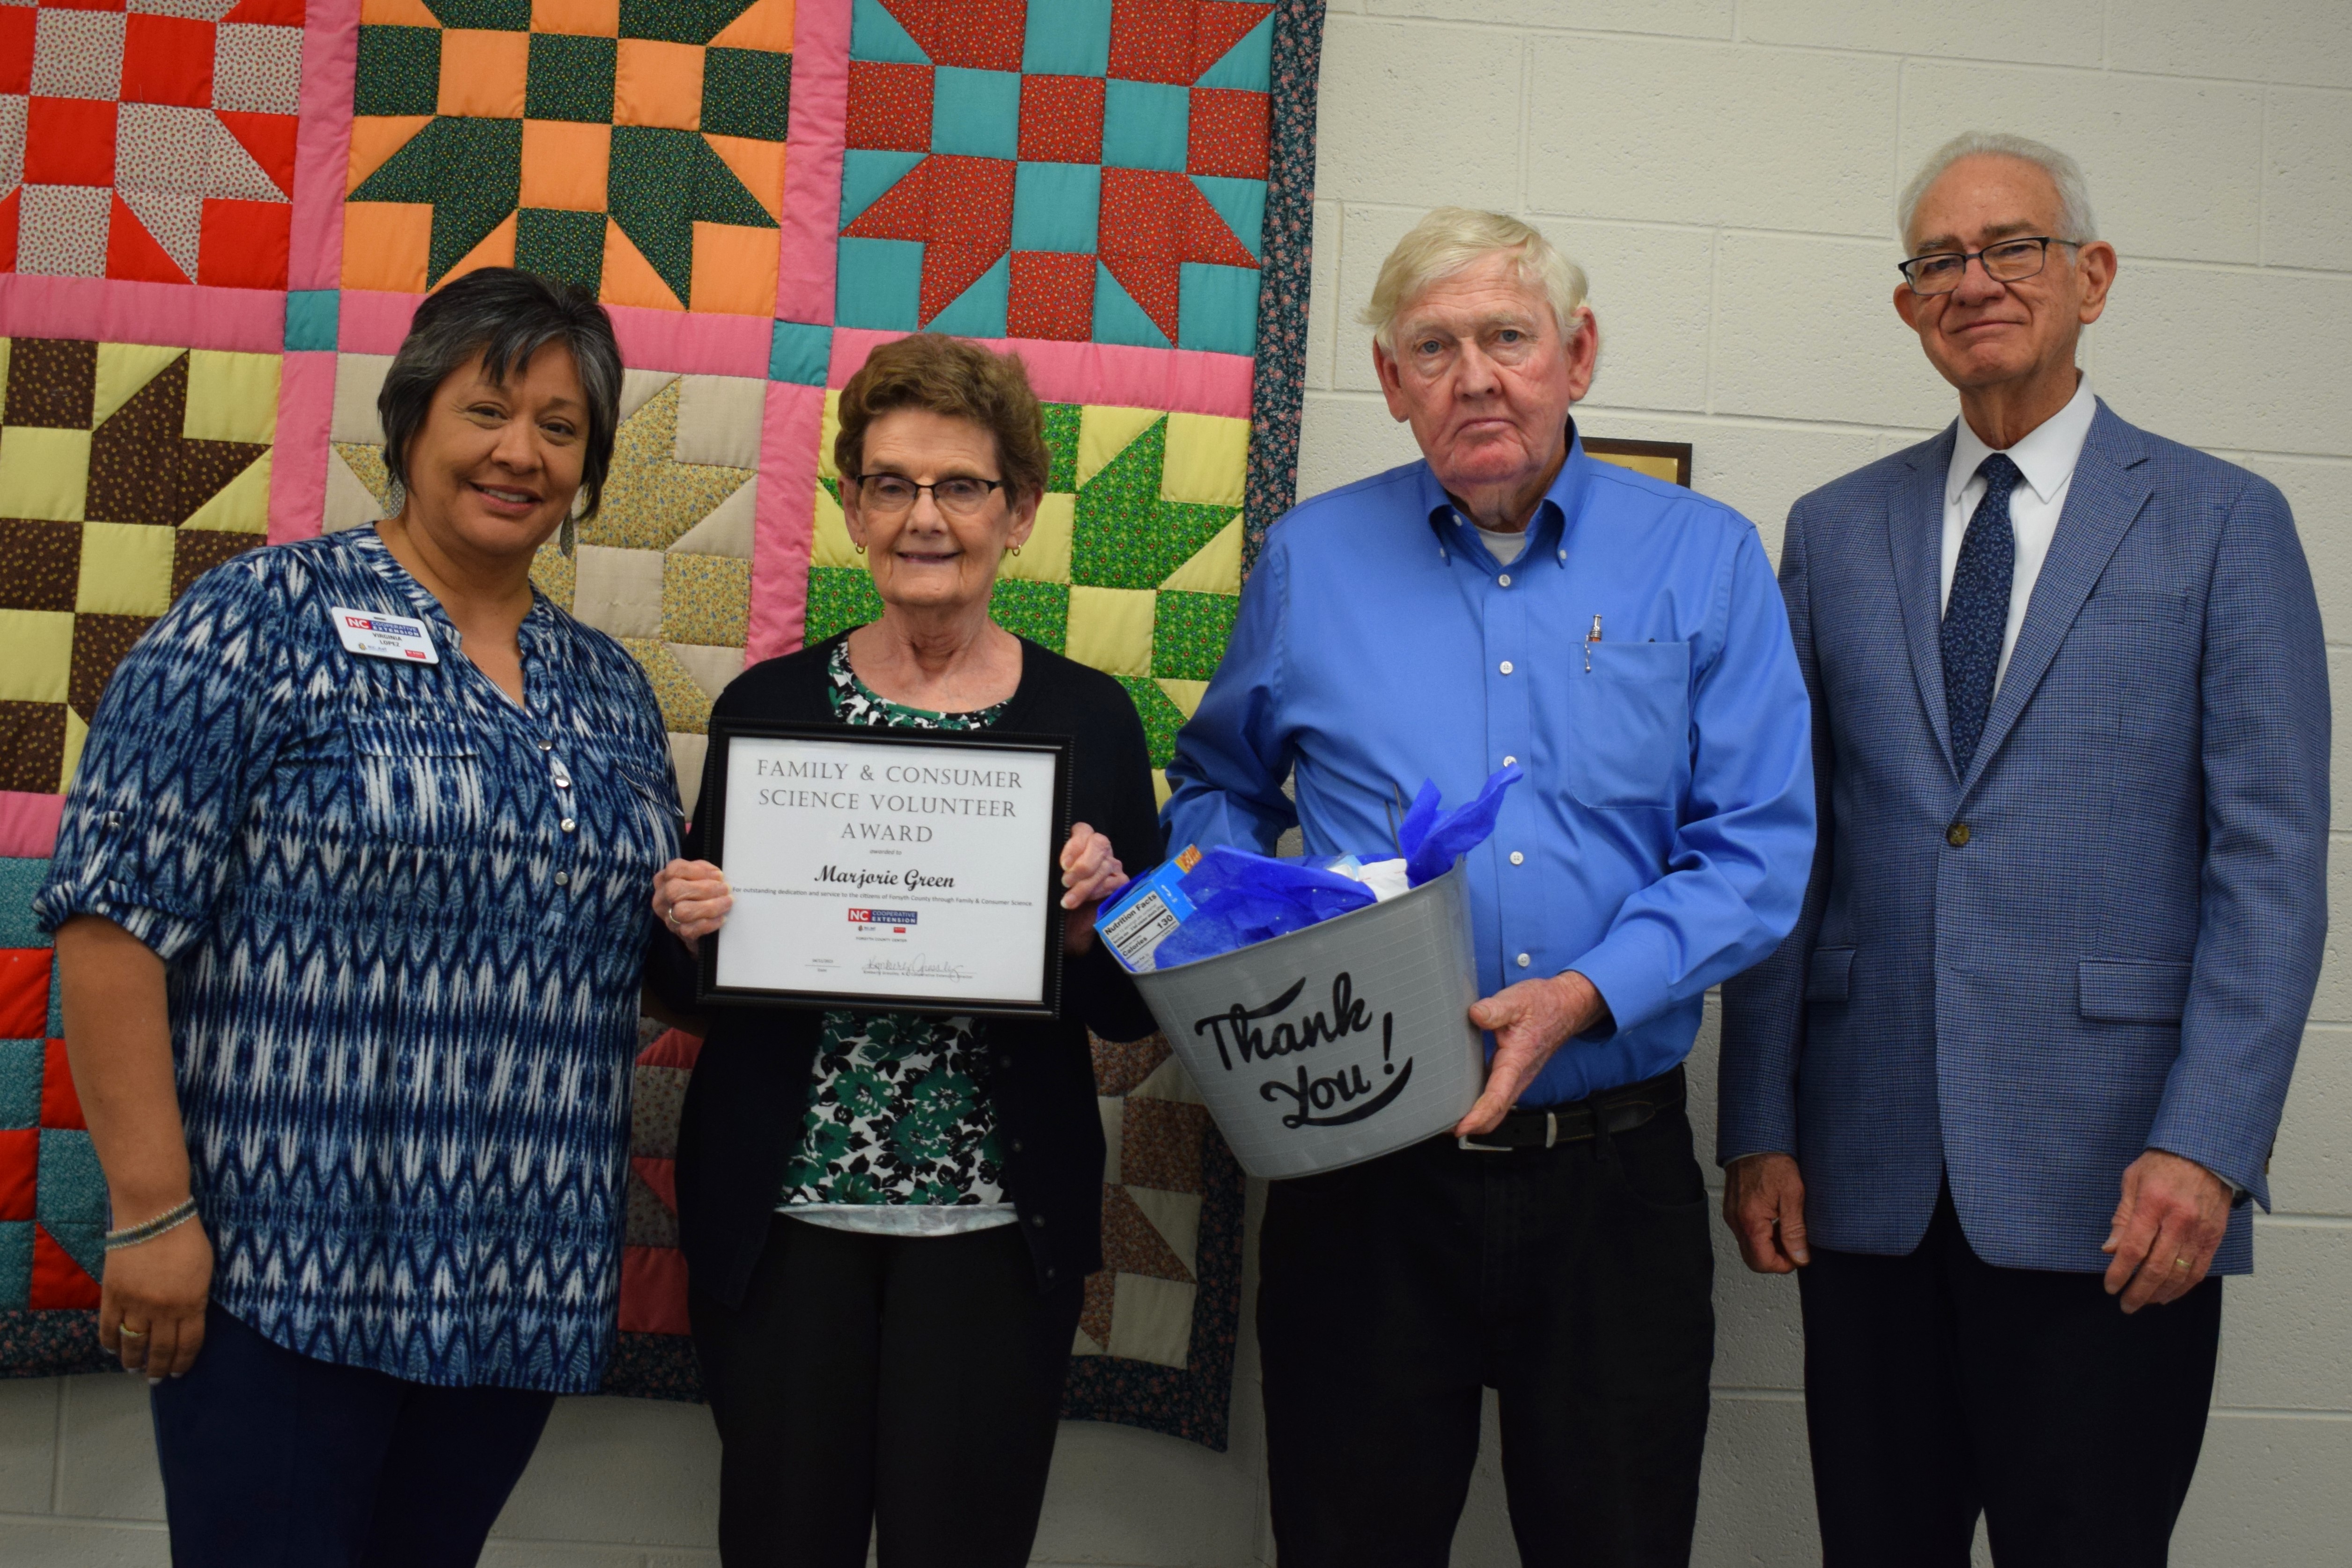 FCS Award Recipient, Marjorie Green, with FCS Agent, Virginia Lopez, and Forsyth County Commissioners Richard Linville and Dr. Don Martin